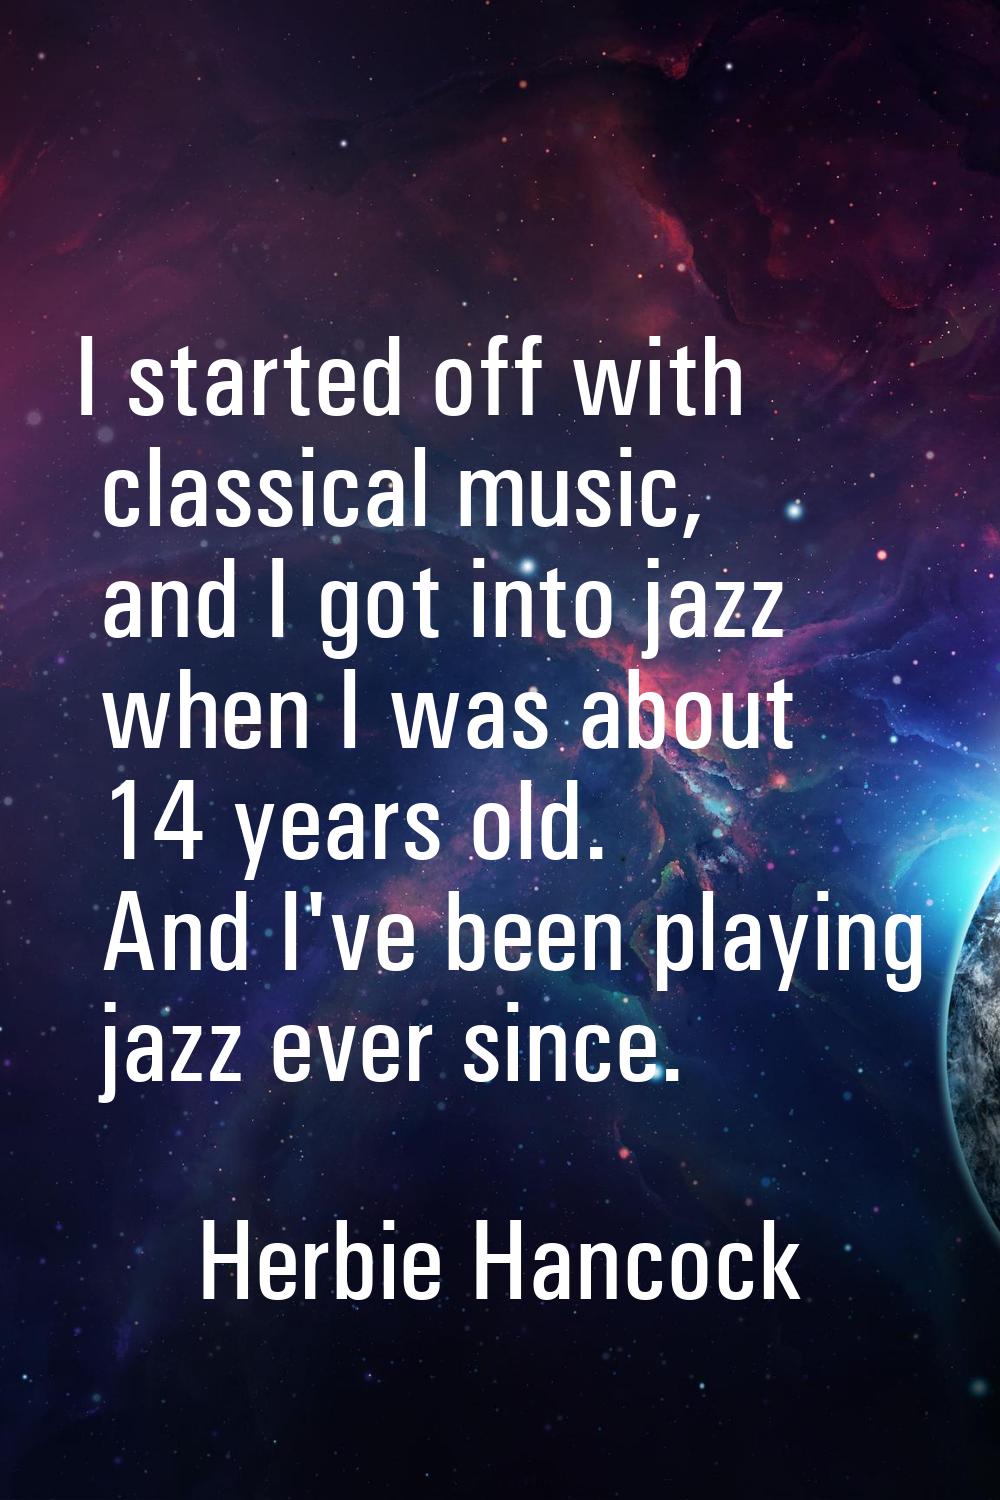 I started off with classical music, and I got into jazz when I was about 14 years old. And I've bee